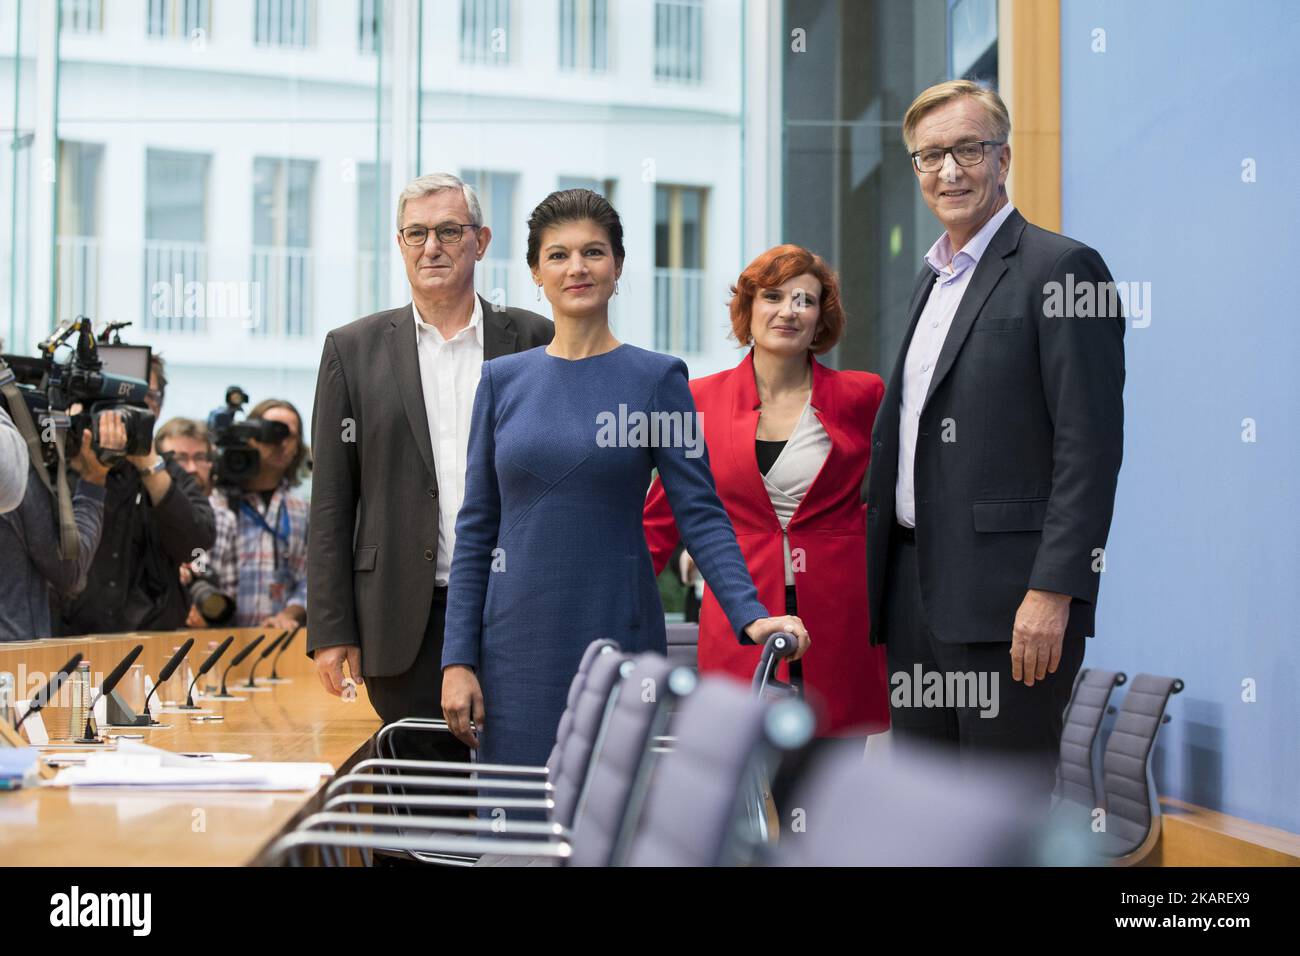 Top candidates of Die Linke (The Left) party Sahra Wagenknecht (2L) and Dietmar Bartsch (R) and Co-Leaders Katja Kipping (2R) and Bernd Riexinger (L) arrive to a press conference in Berlin, Germany on September 25, 2017. (Photo by Emmanuele Contini/NurPhoto) Stock Photo